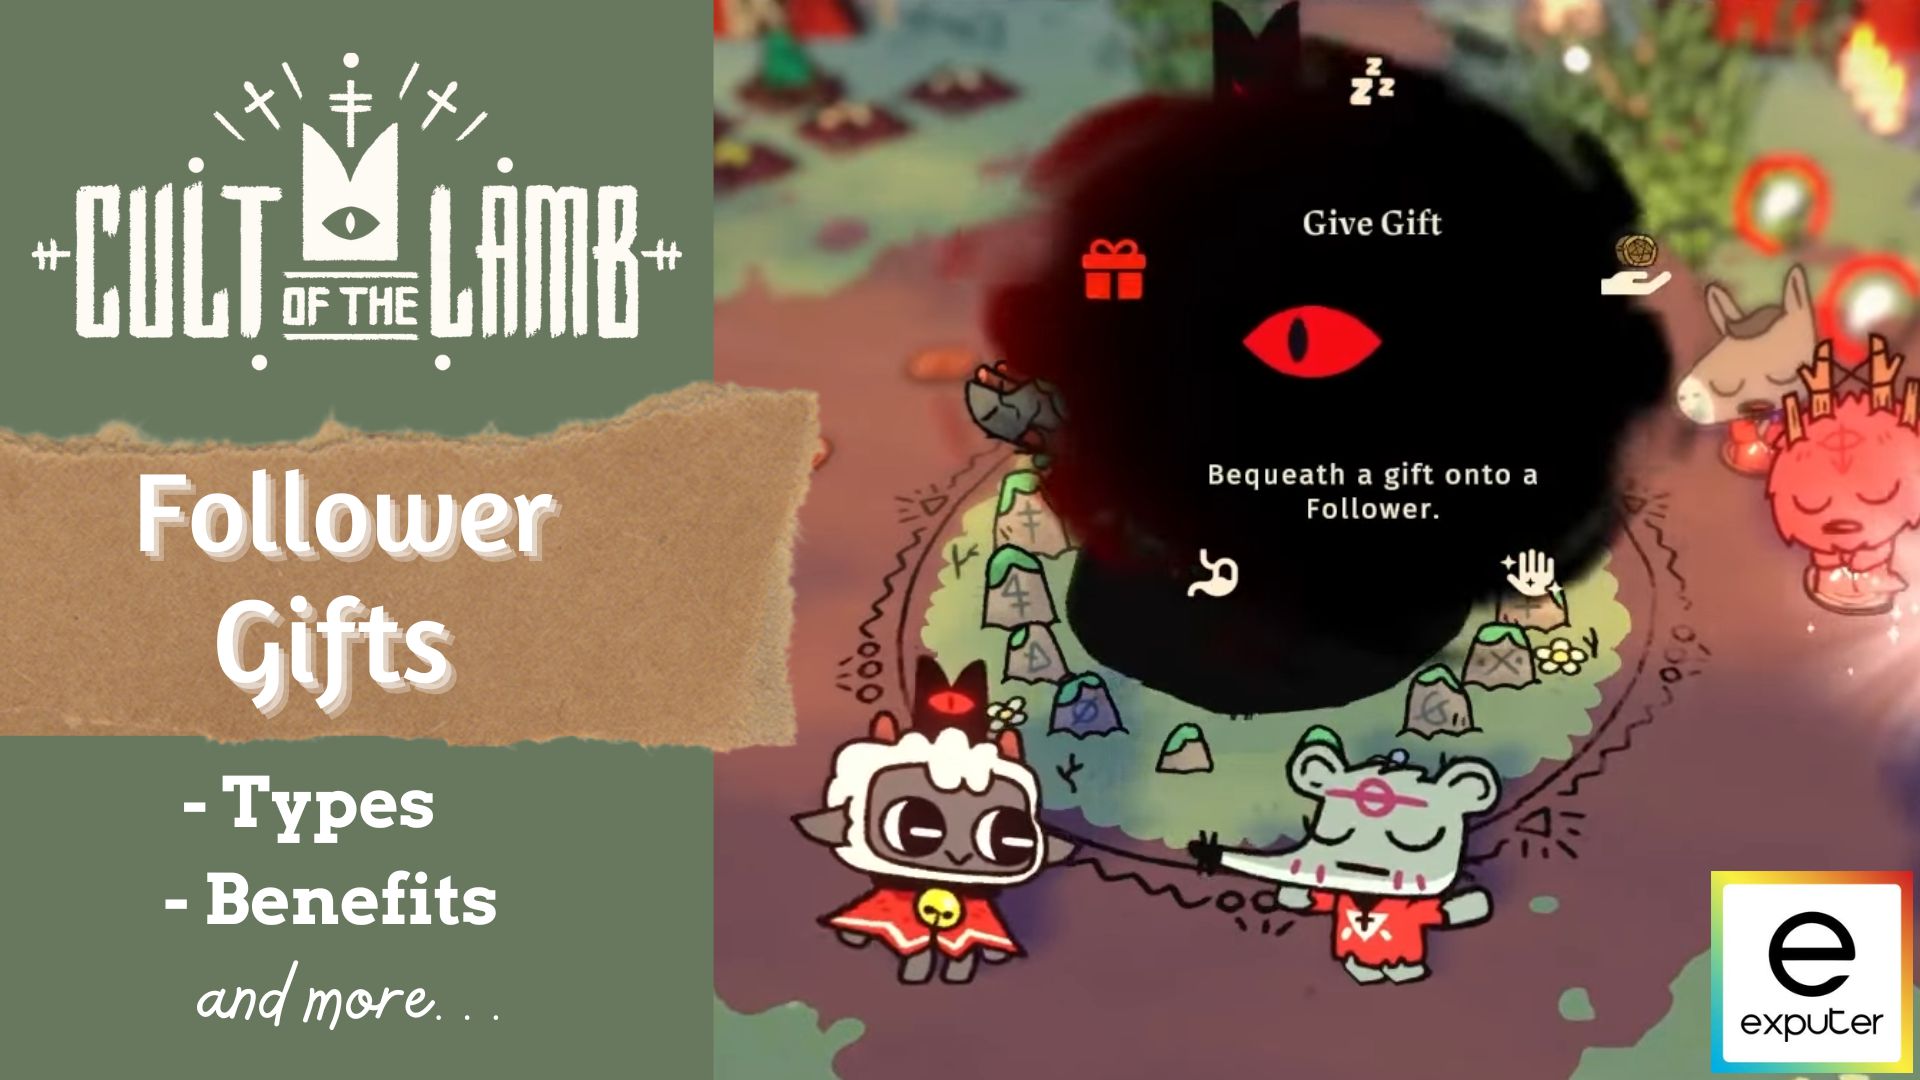 you can give gifts to followers in Cult of the Lamb.